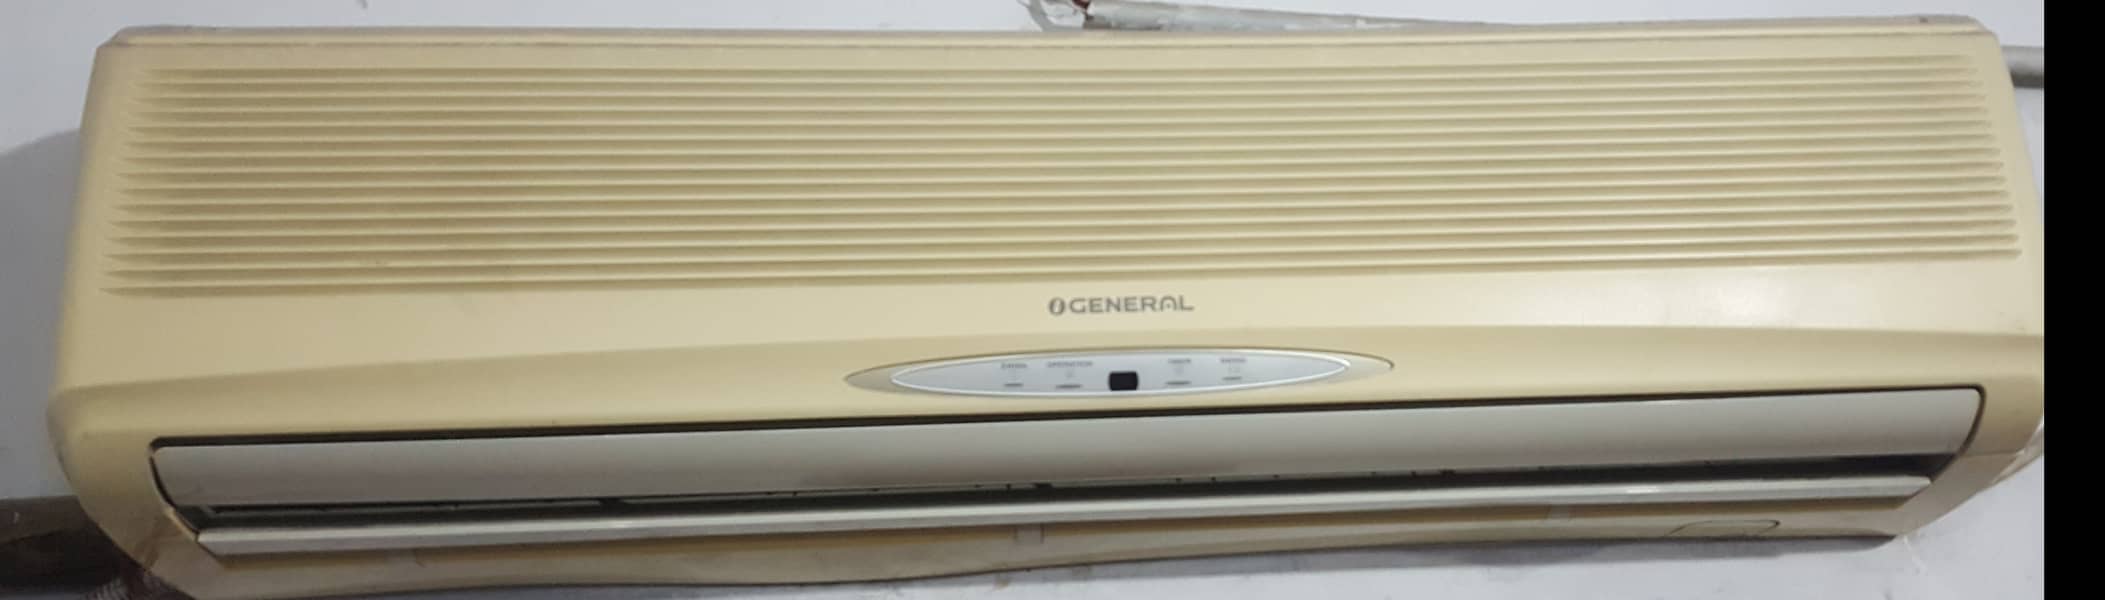 General Ac 1.5 ton For Sale 0